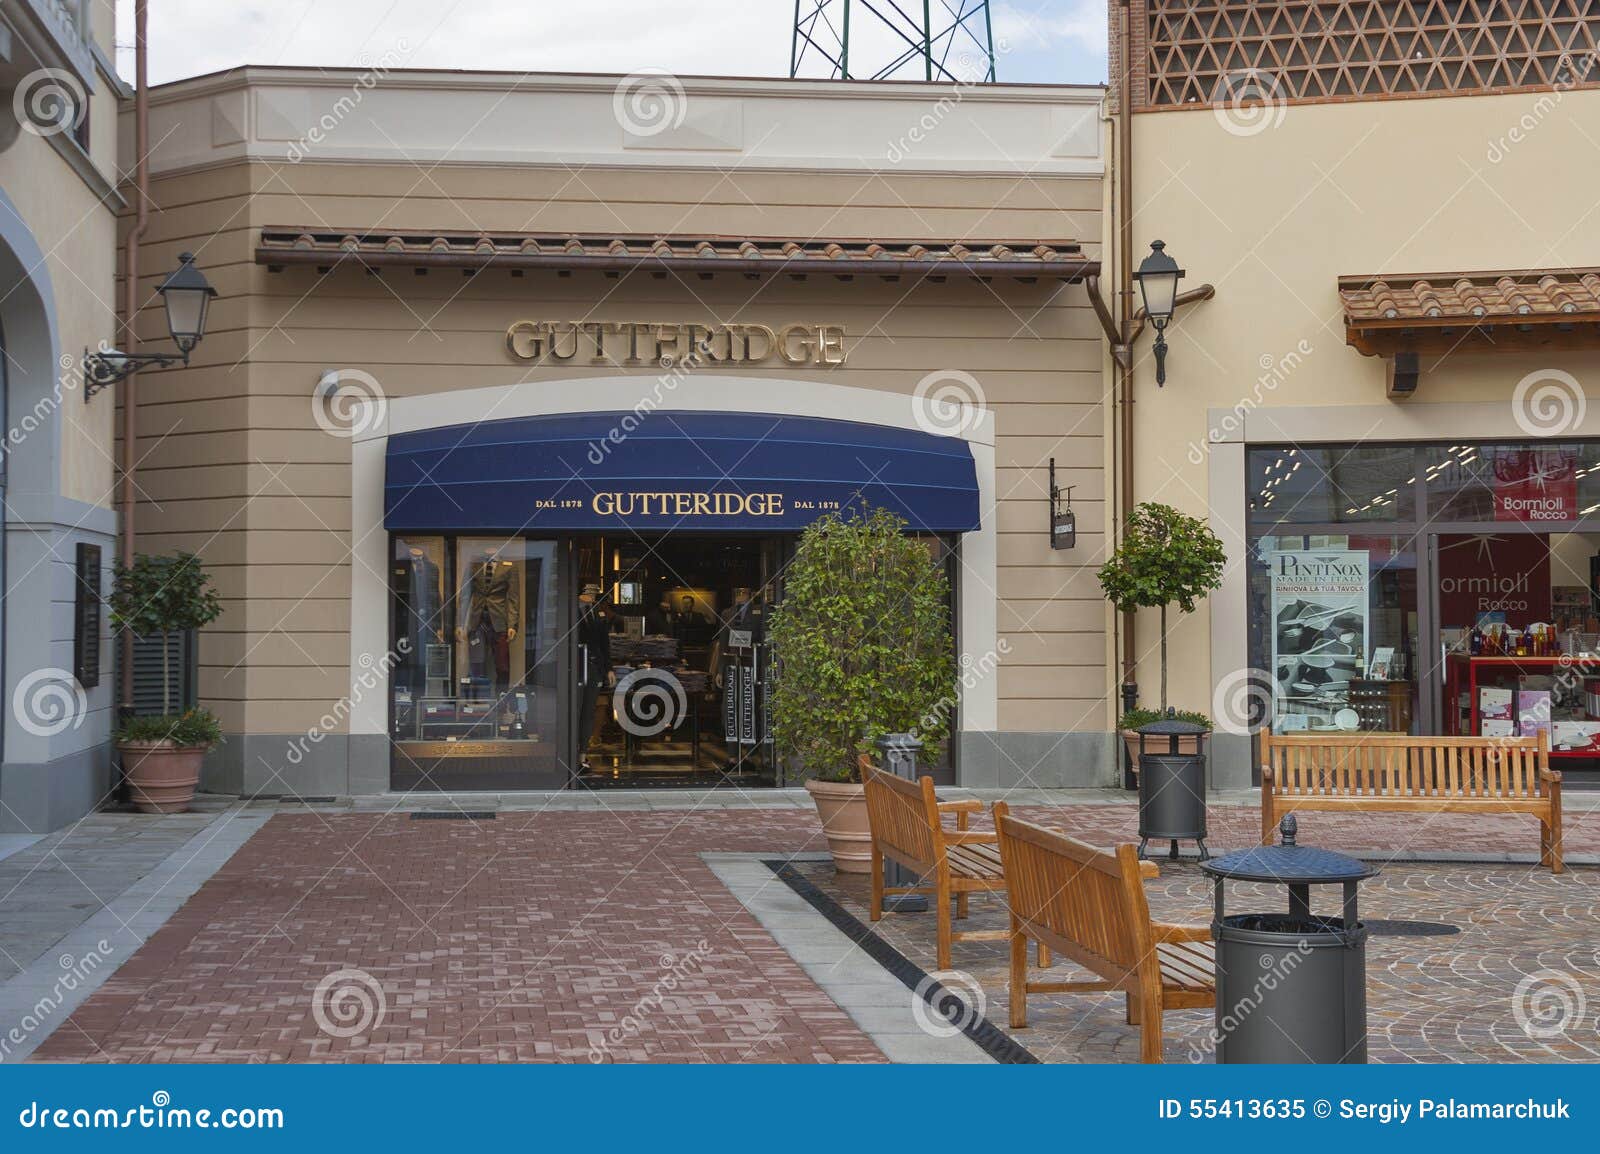 McArthurGlen Designer Outlet Barberino In Italy Editorial Image - Image of boutique, consumer ...